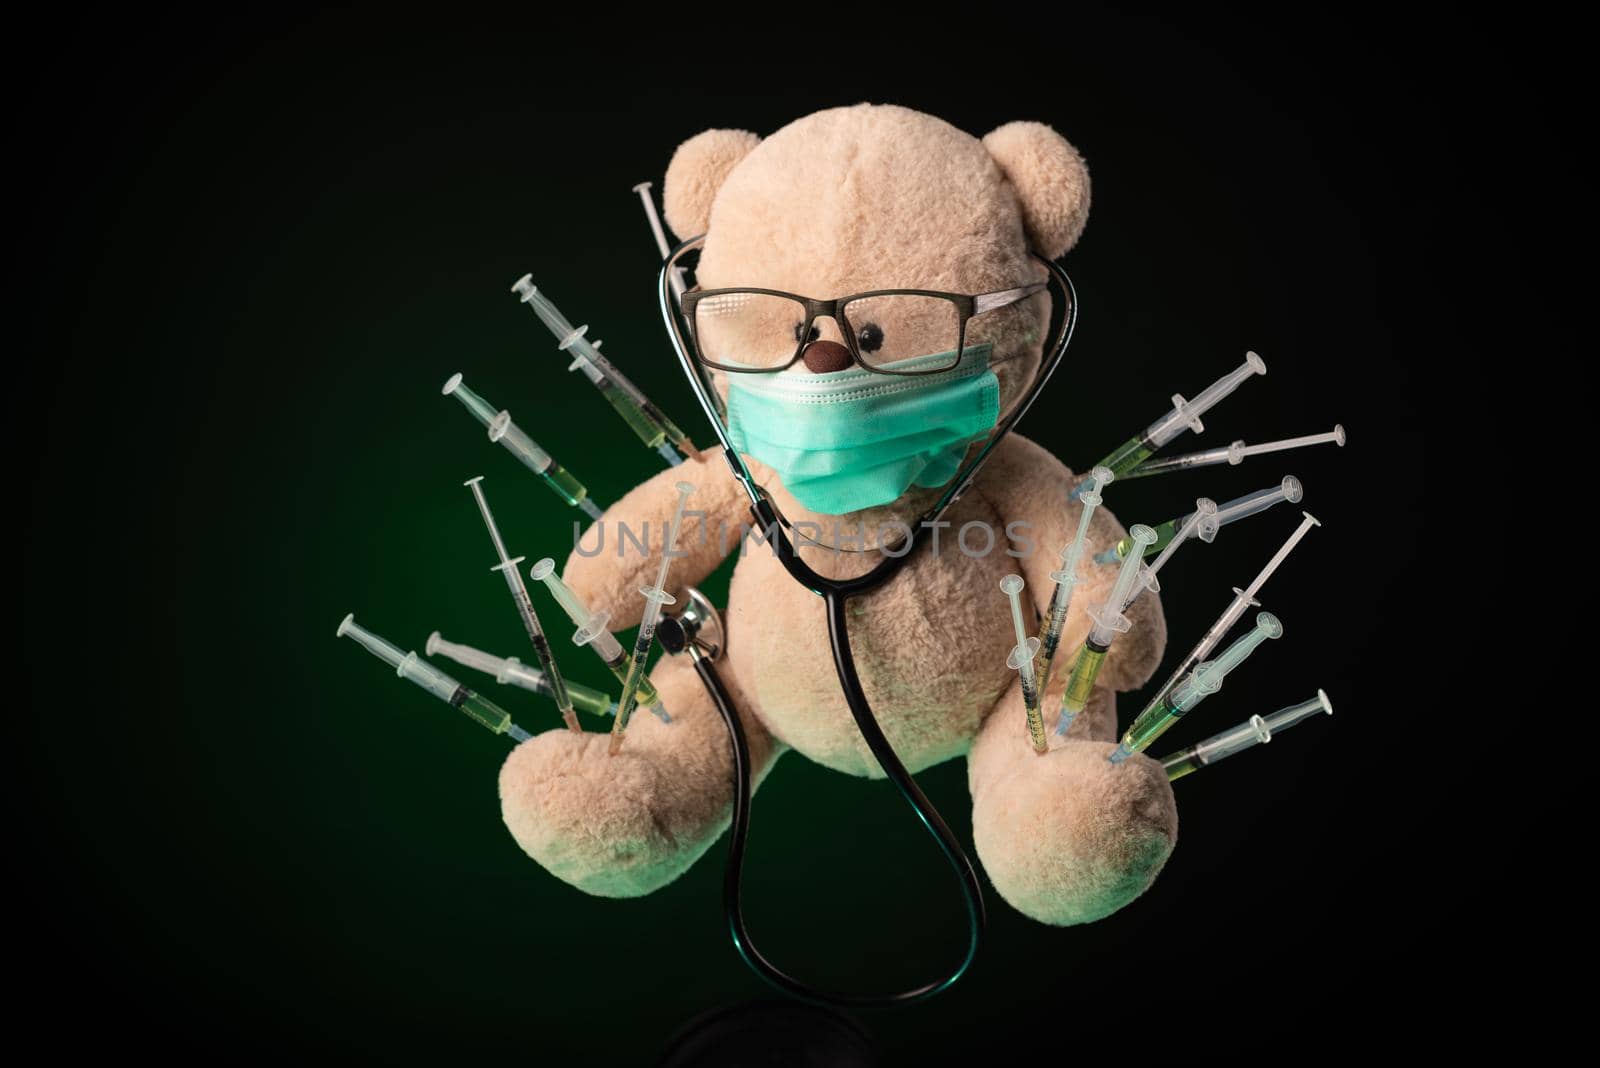 children's vaccination against the covid19 virus and vaccinations on the example of a teddy bear by Rotozey